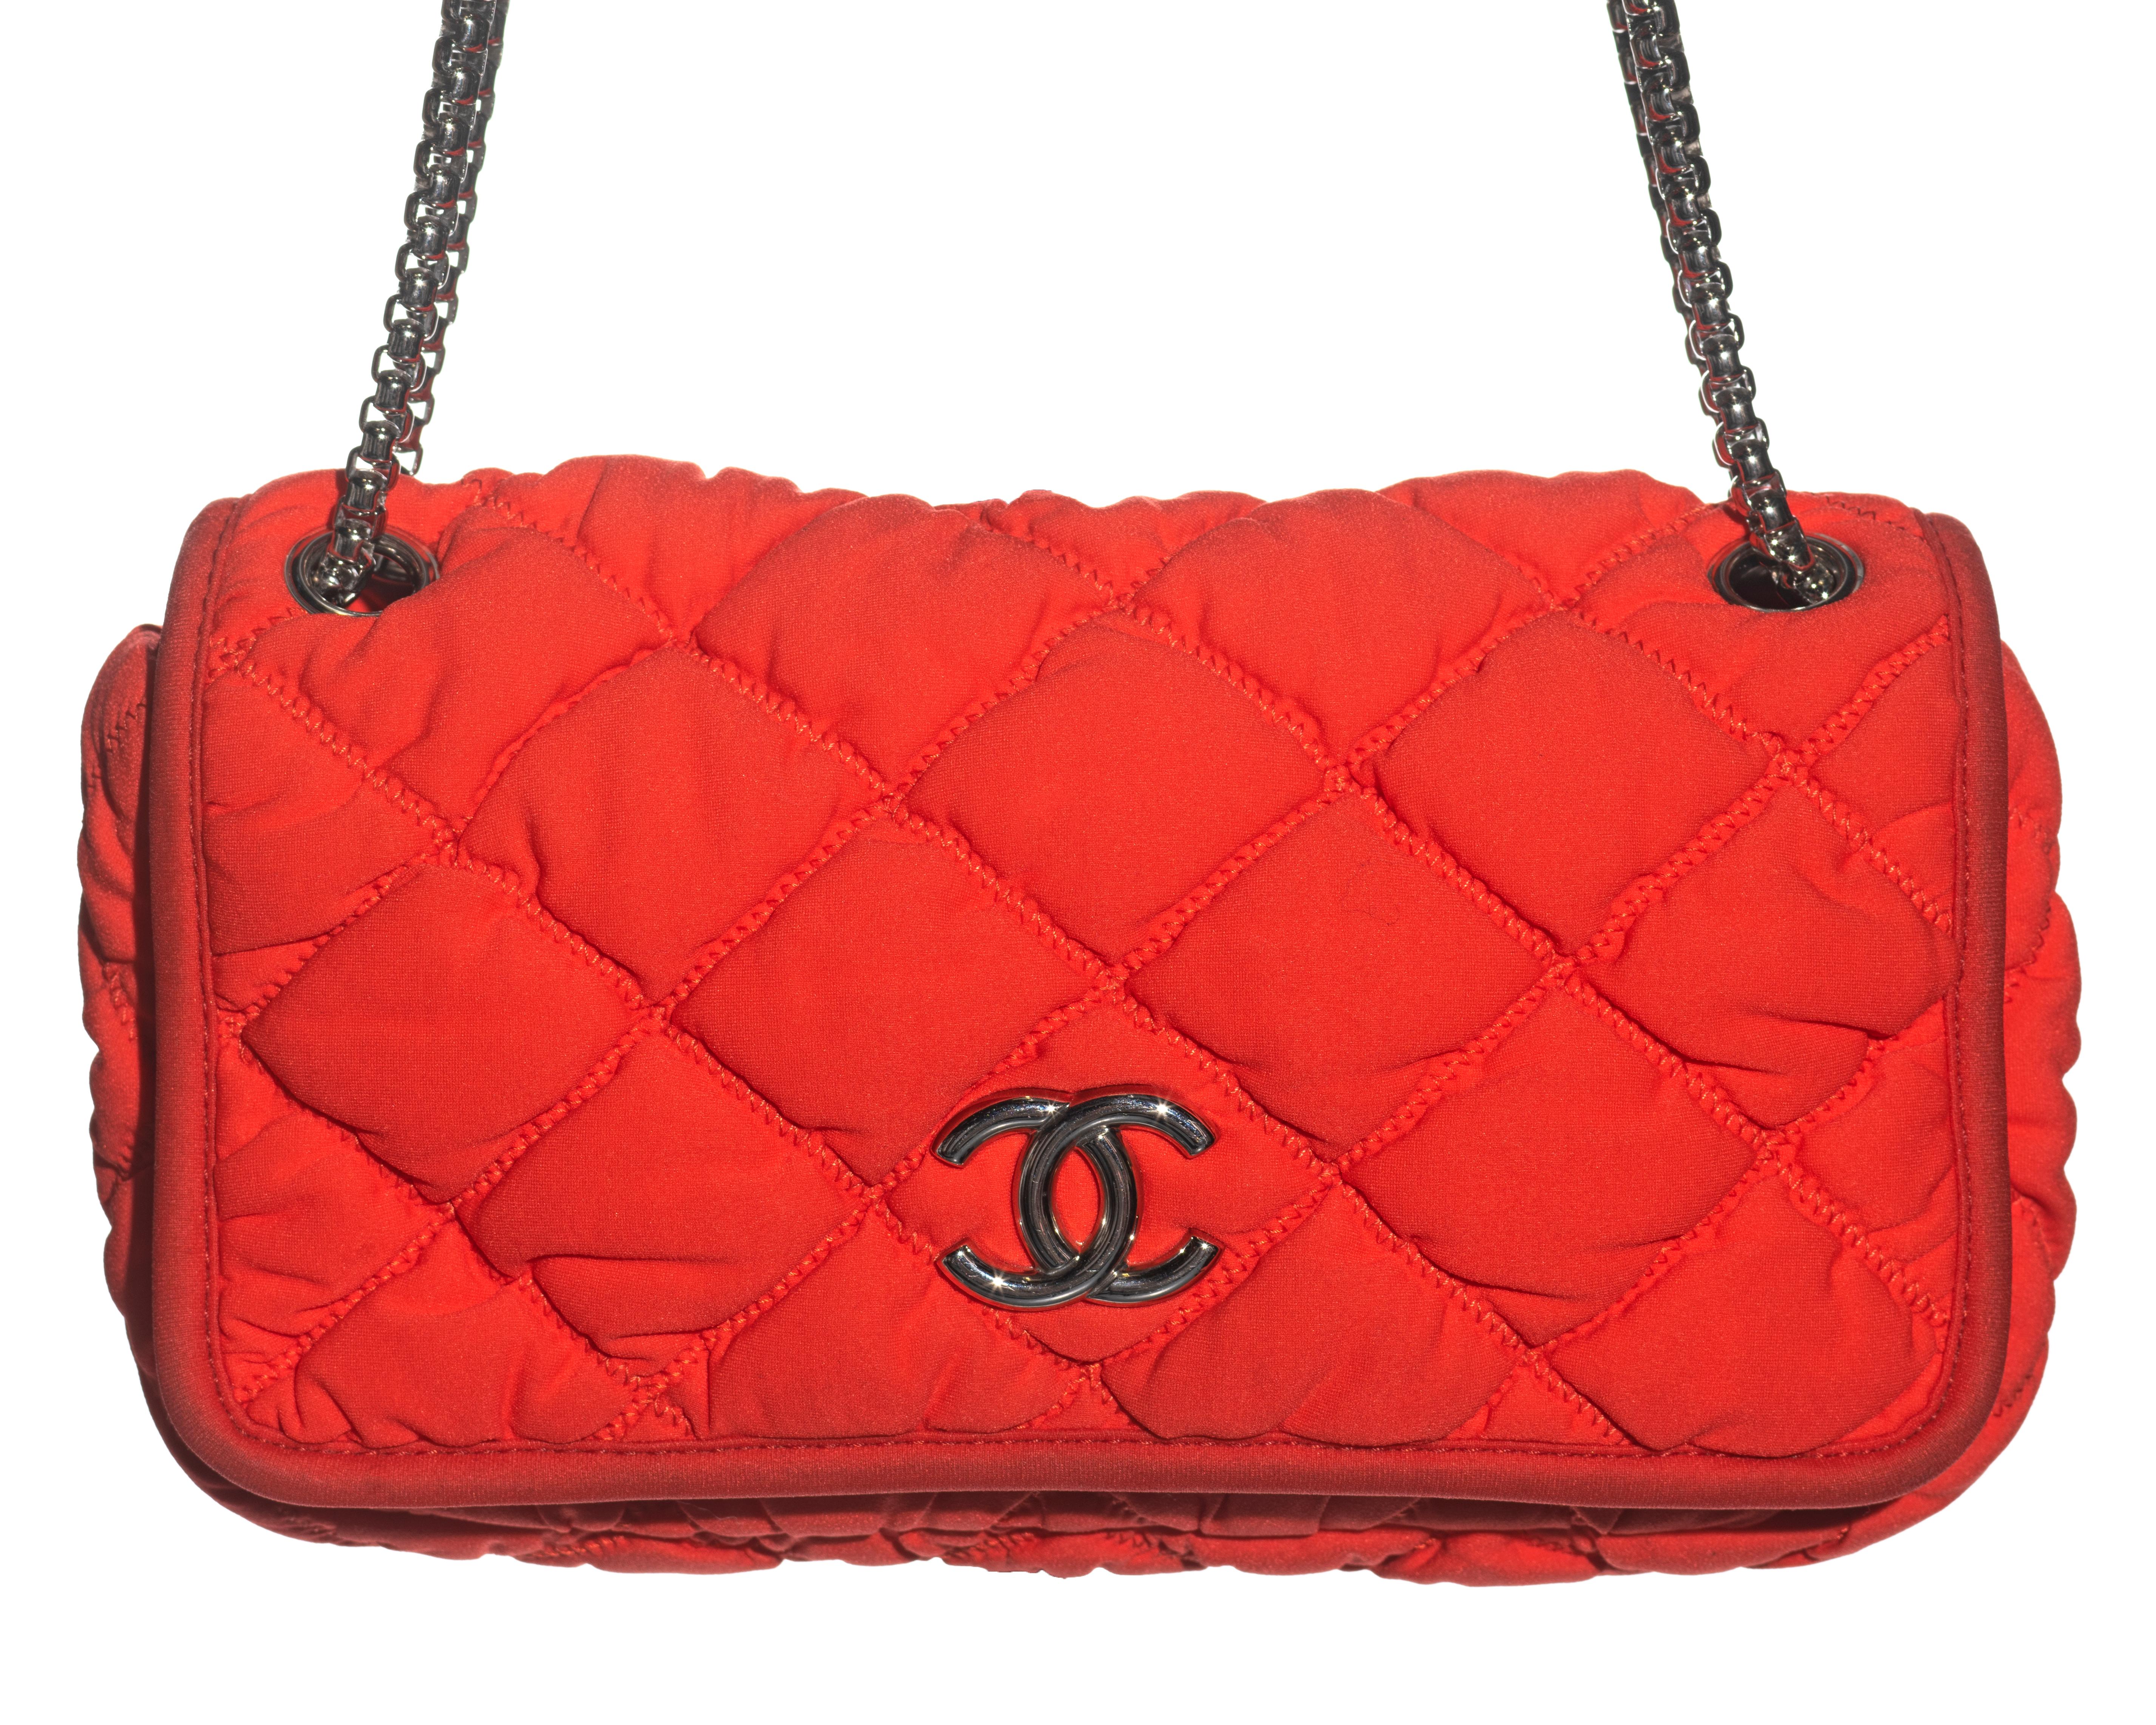 Red Chanel orange nylon bubble quilted flap bag with silver hardware, c. 2008